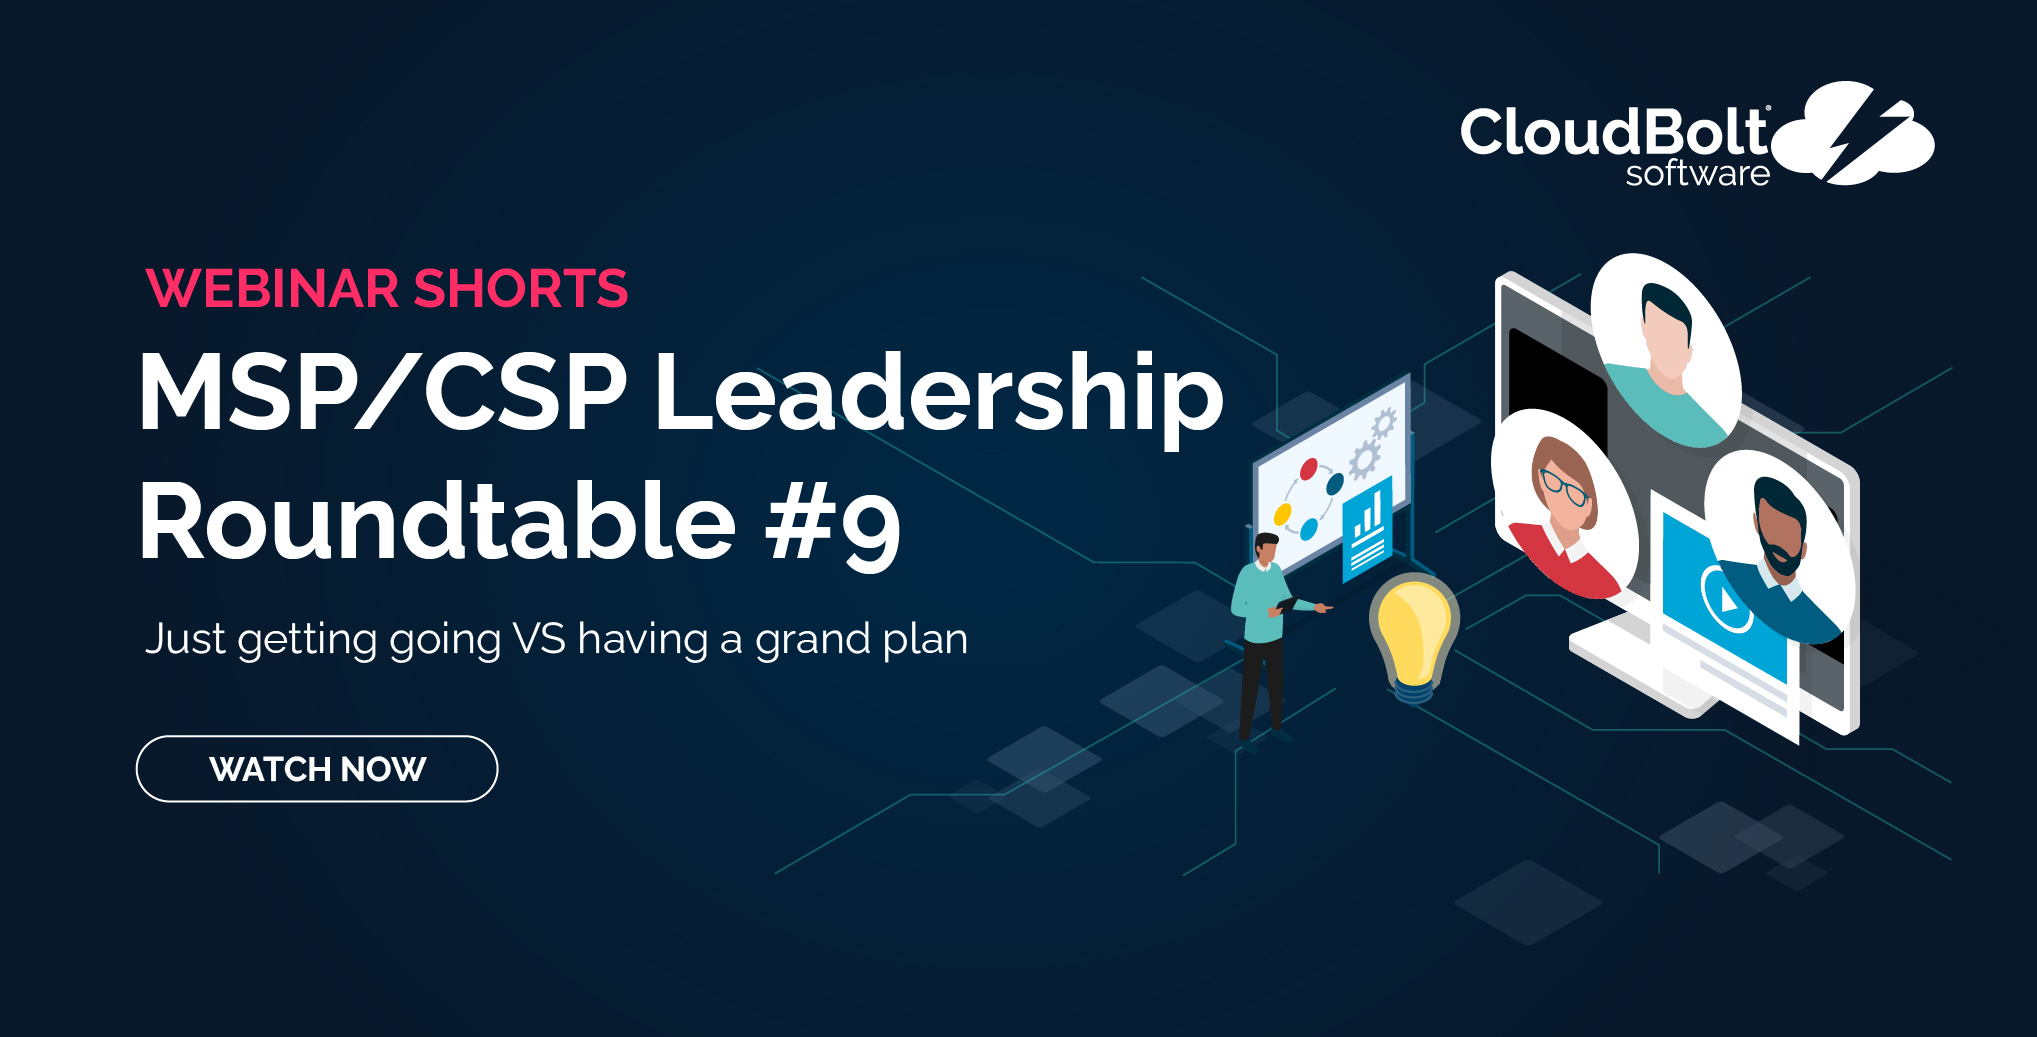 MSP Leadership Roundtable #9: Getting started vs. having a plan